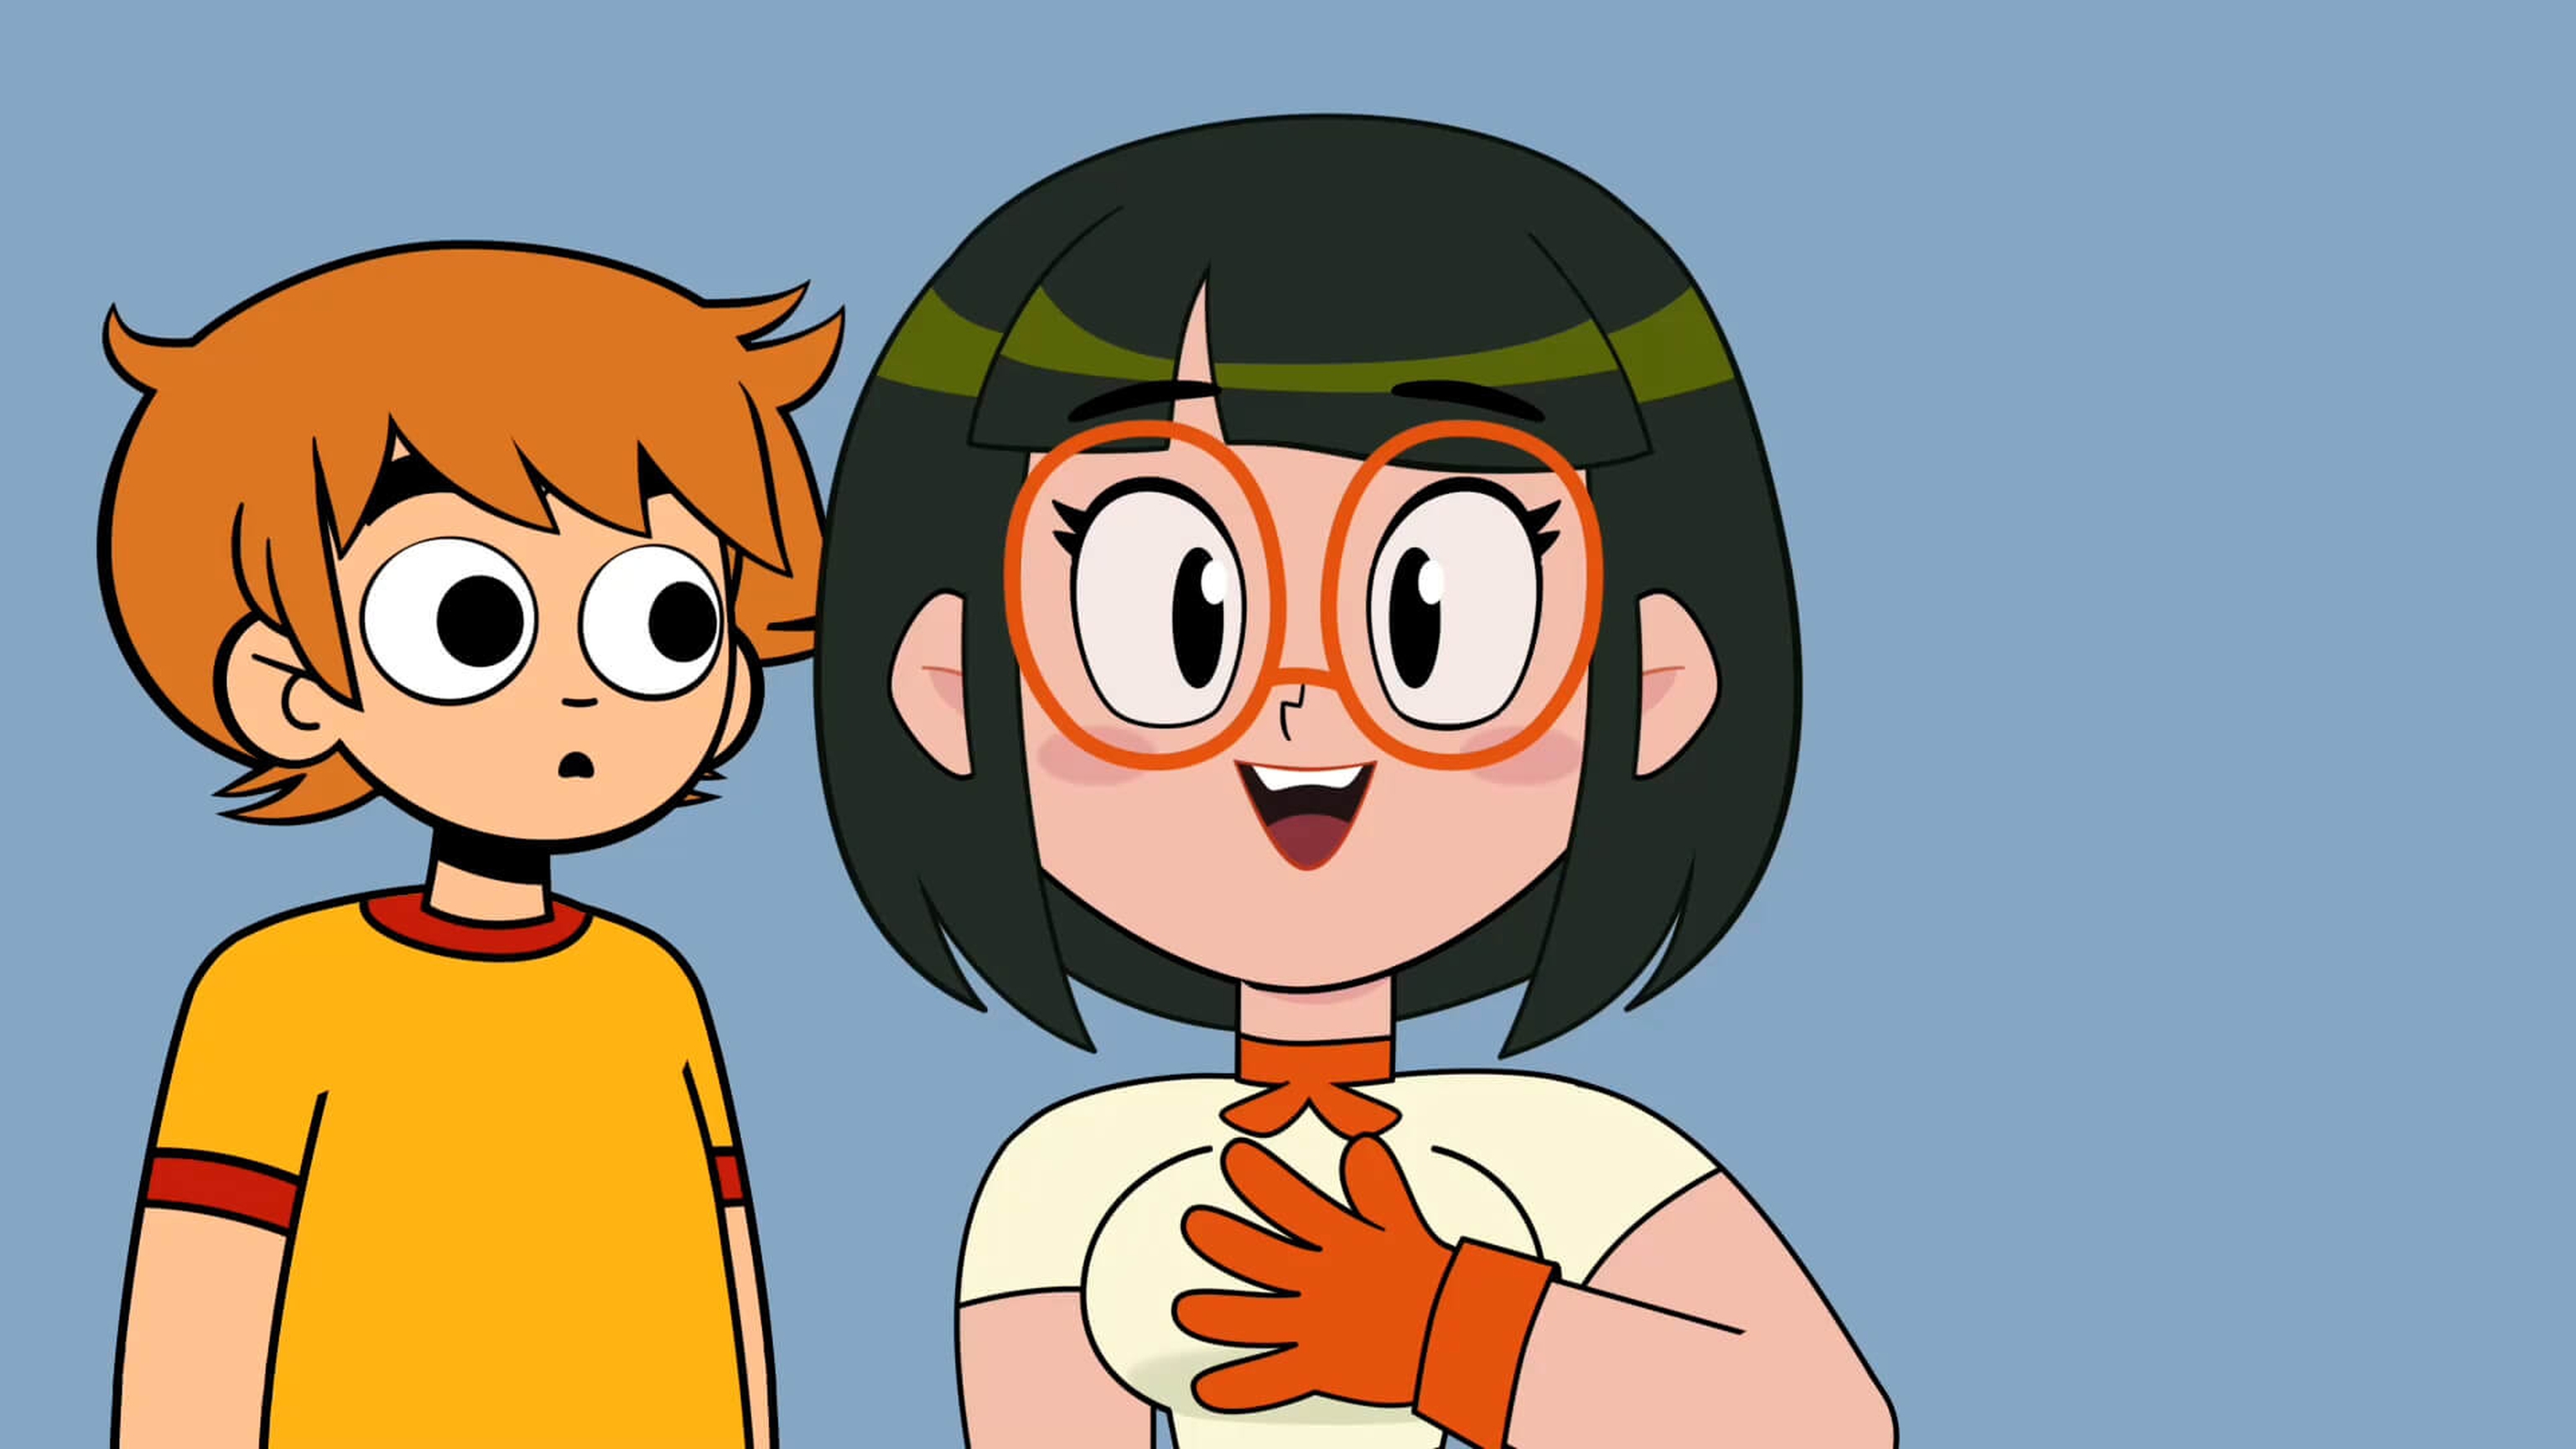 Two 2D animated characters looking surprised